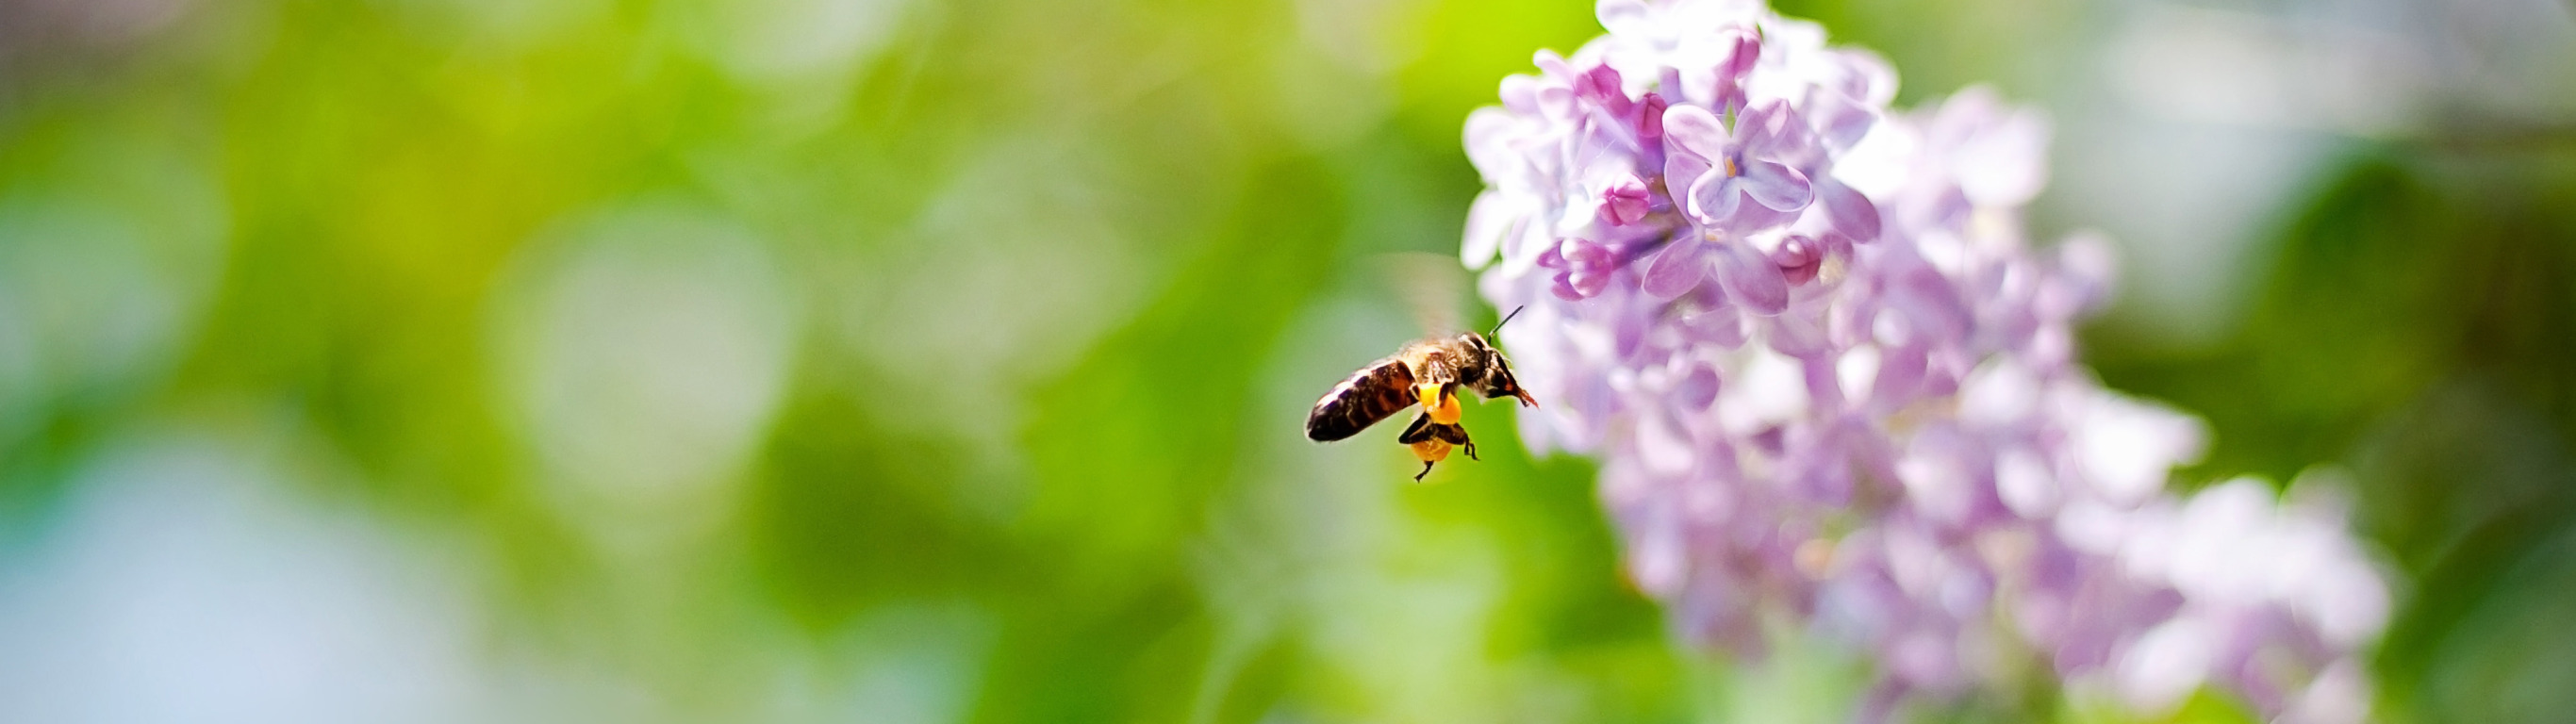 insect, lilac, bokeh